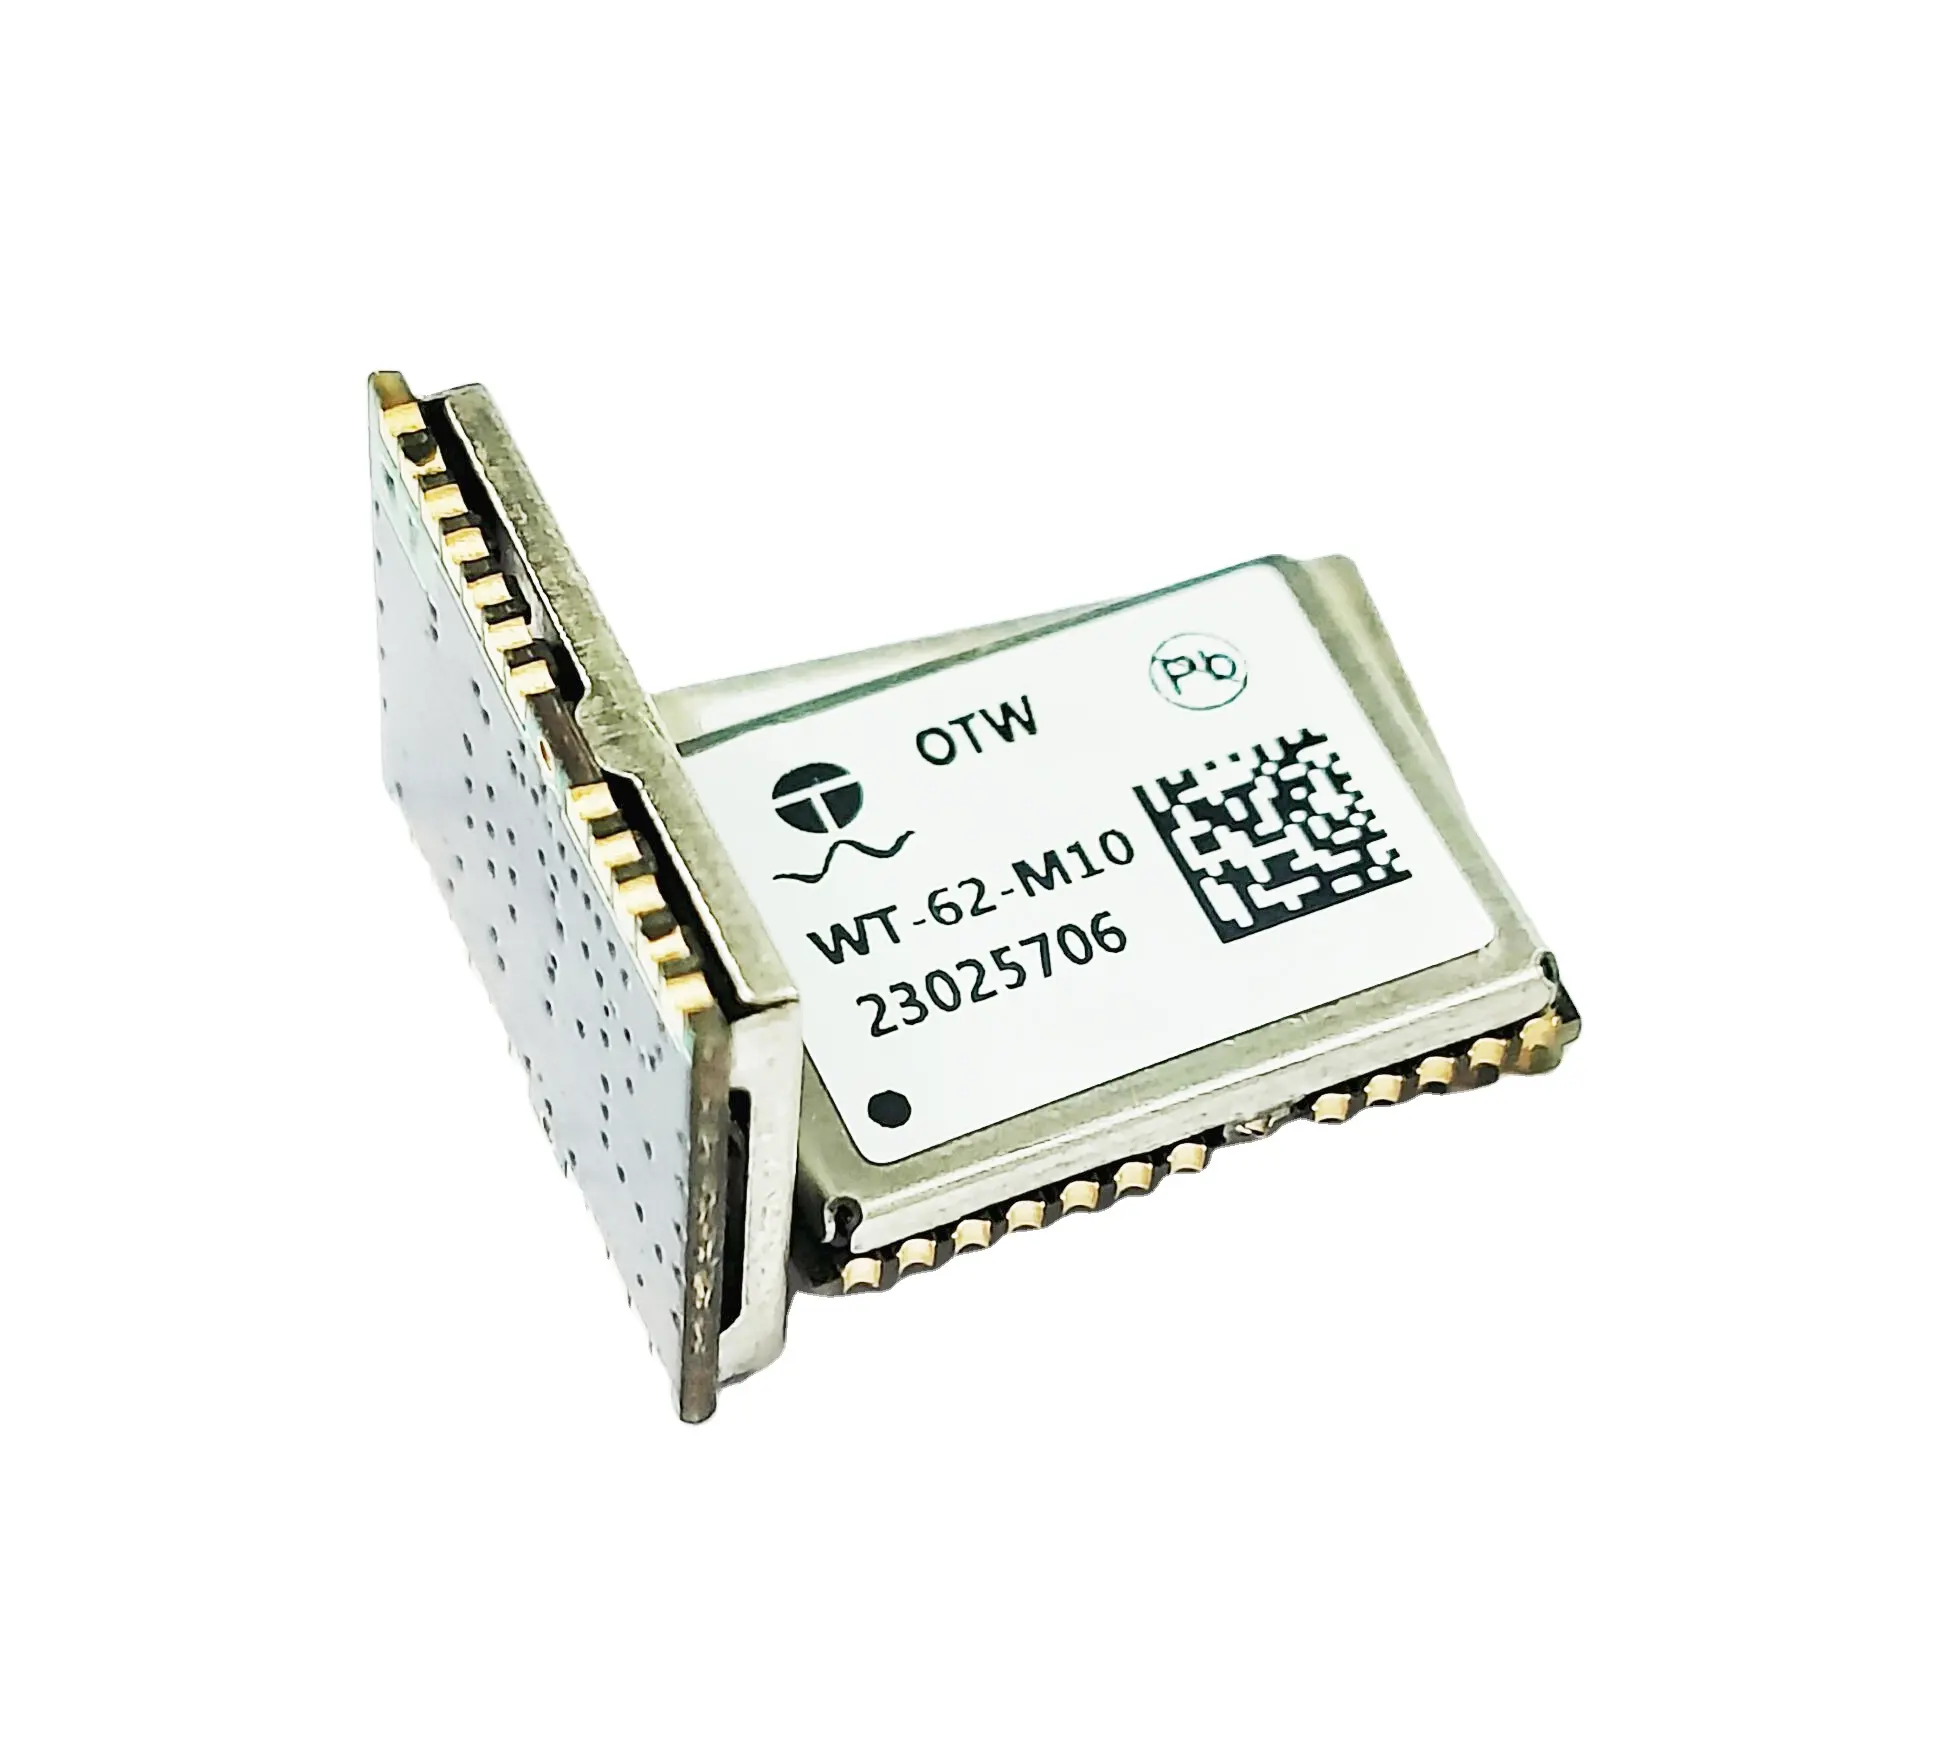 High Accuracy WT-62-M10 GPS GNSS Module Small Size Tracking Module At A Cheap Price